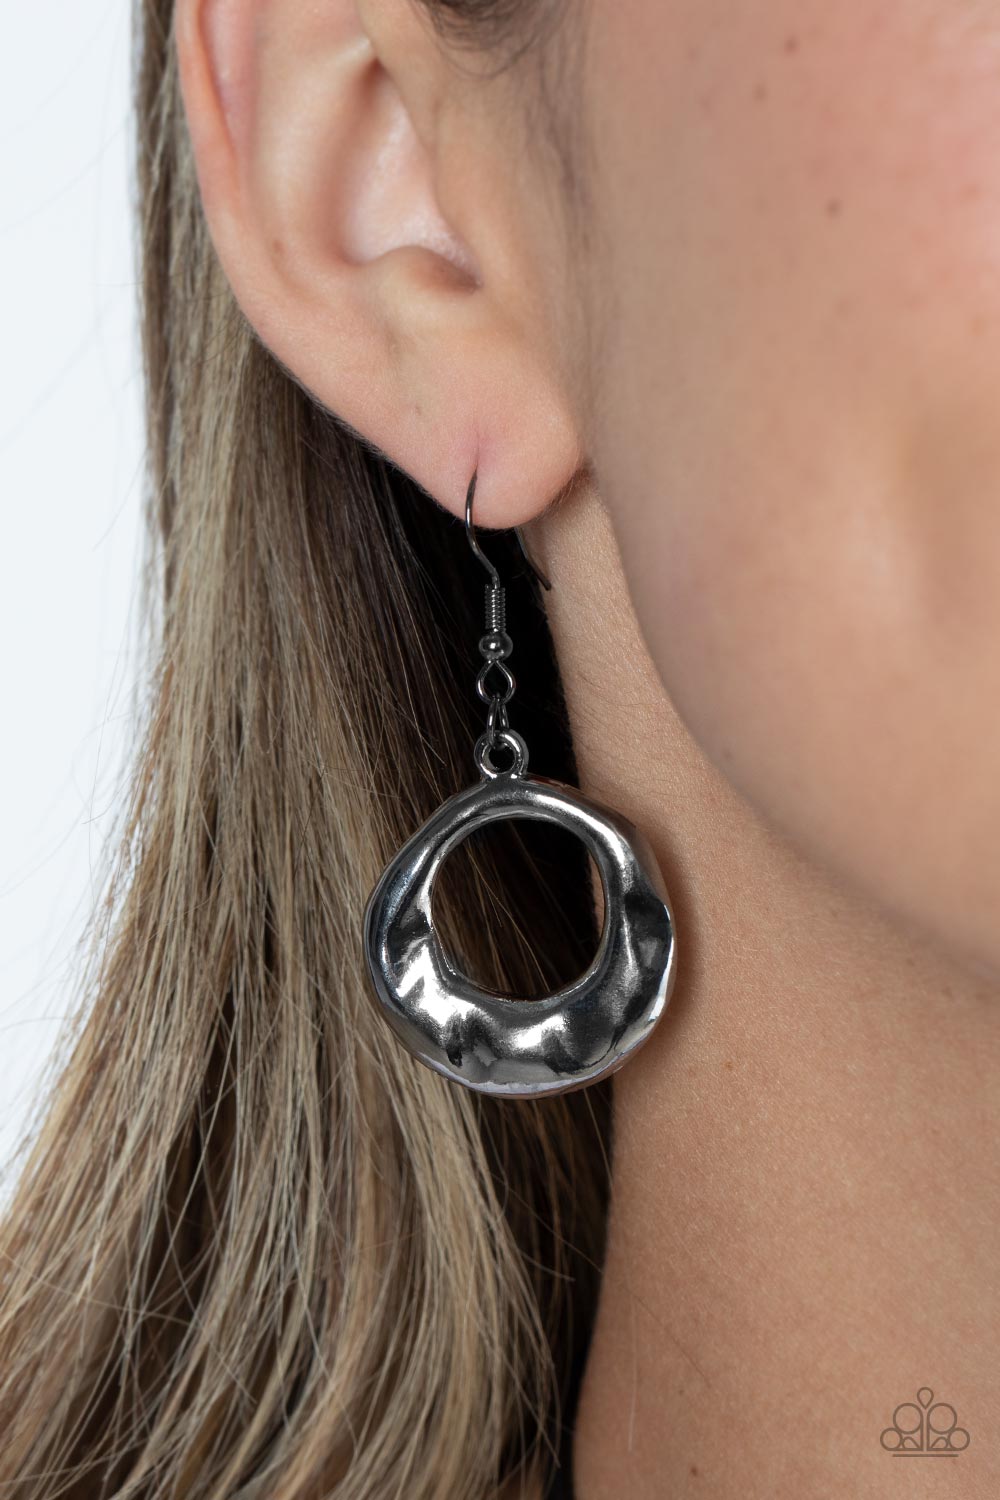 Tectonic Treasure - Black Gunmetal Necklace - Paparazzi Accessories - An oversized, oblong, gunmetal hoop rippling with hammered textures swings from the bottom of a collection of black cording. A single gunmetal bead glides down the bottom of the cording for a dramatic industrial look, anchoring the cording to the hoop.